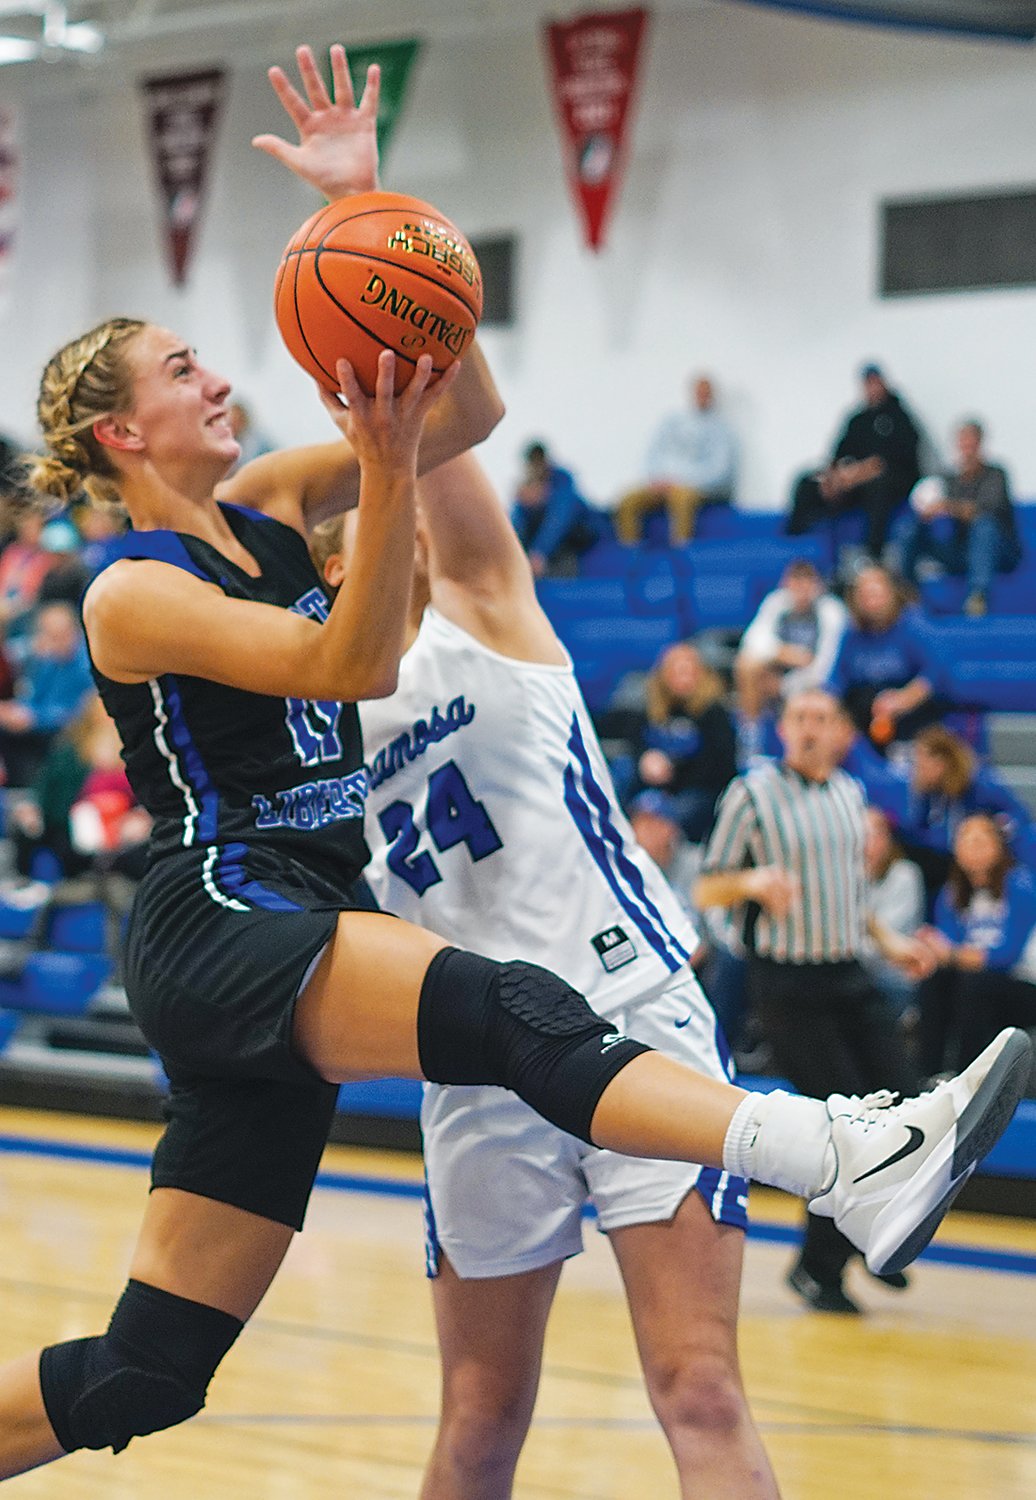 Senior Macy Daufeldt drives to the basket for the Comets against Anamosa last week.